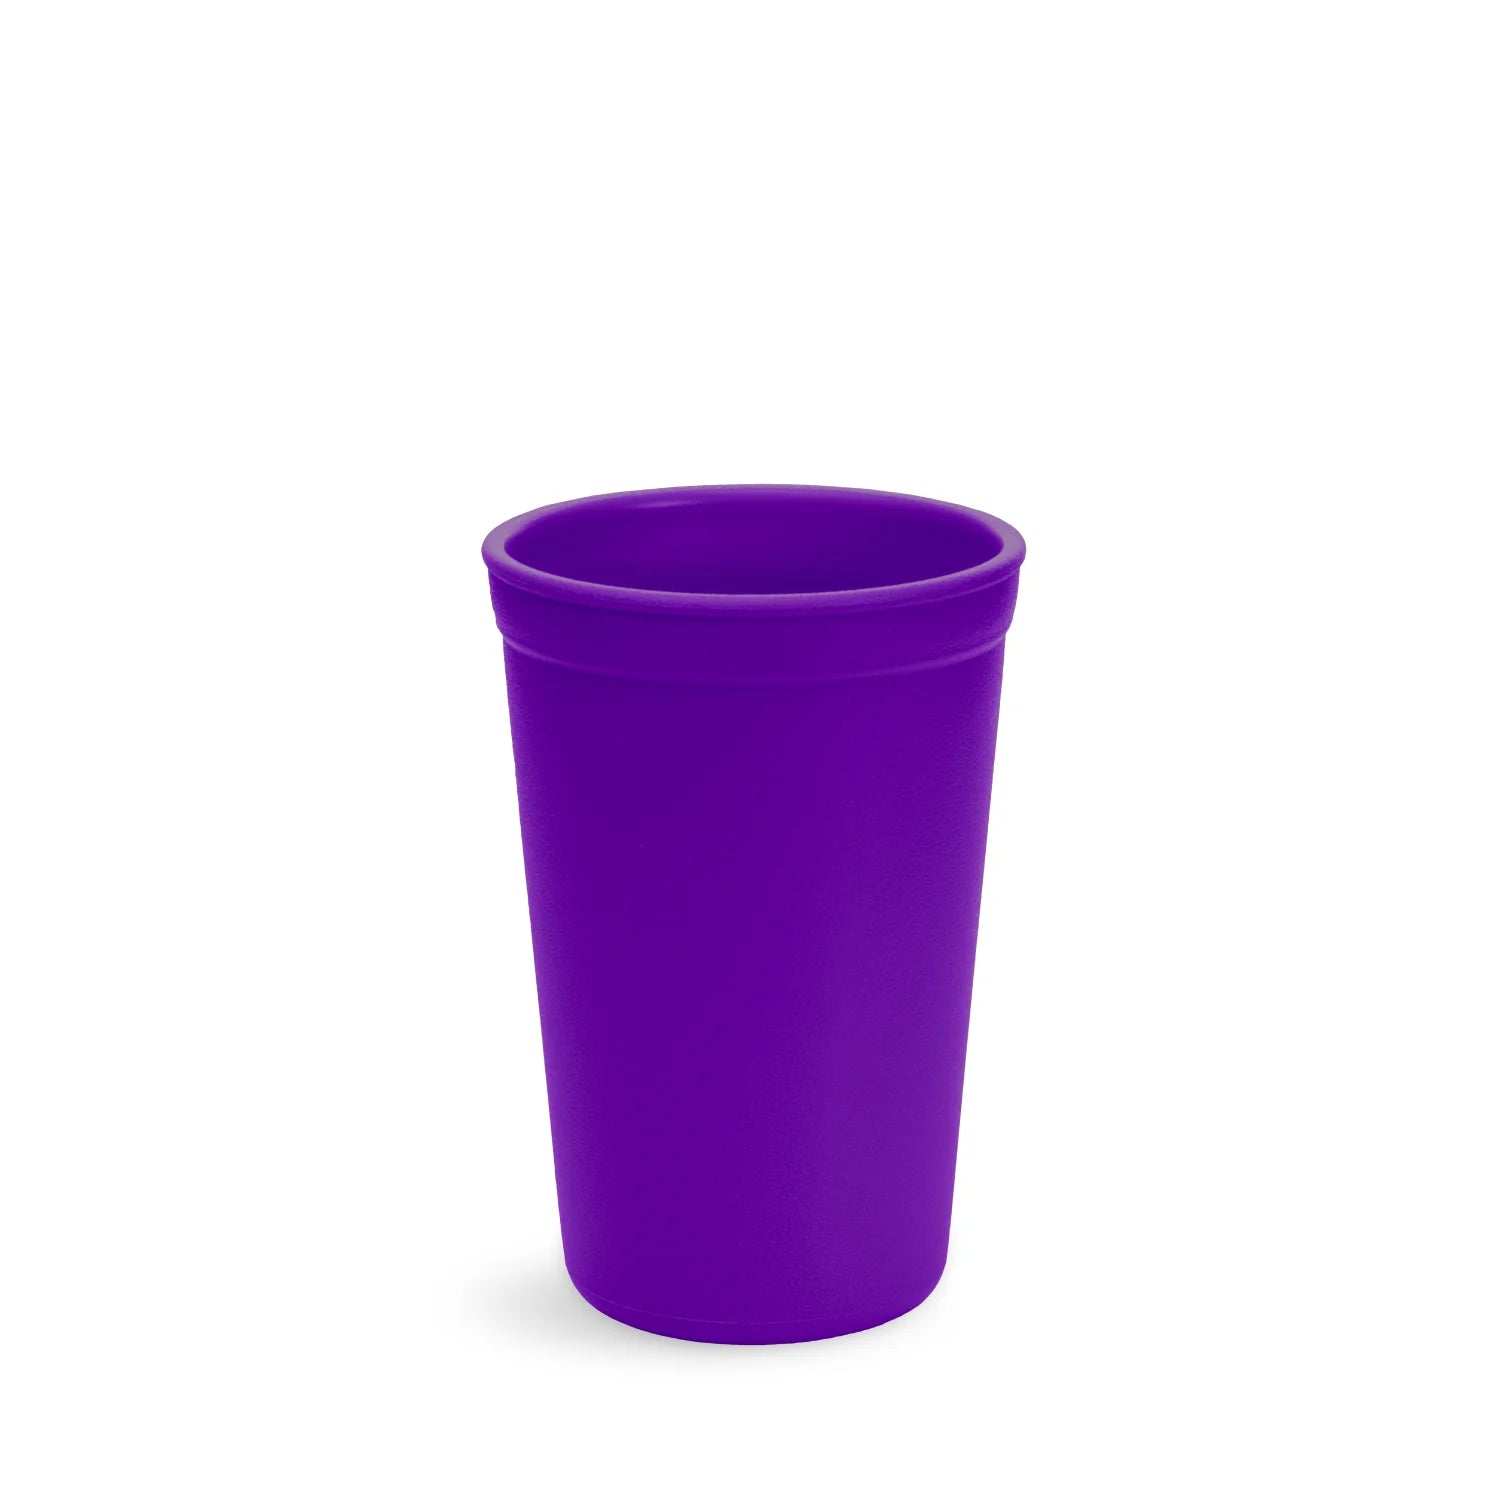 Re-Play 3 Pack Drinking Cups - Pink/Purple/Green